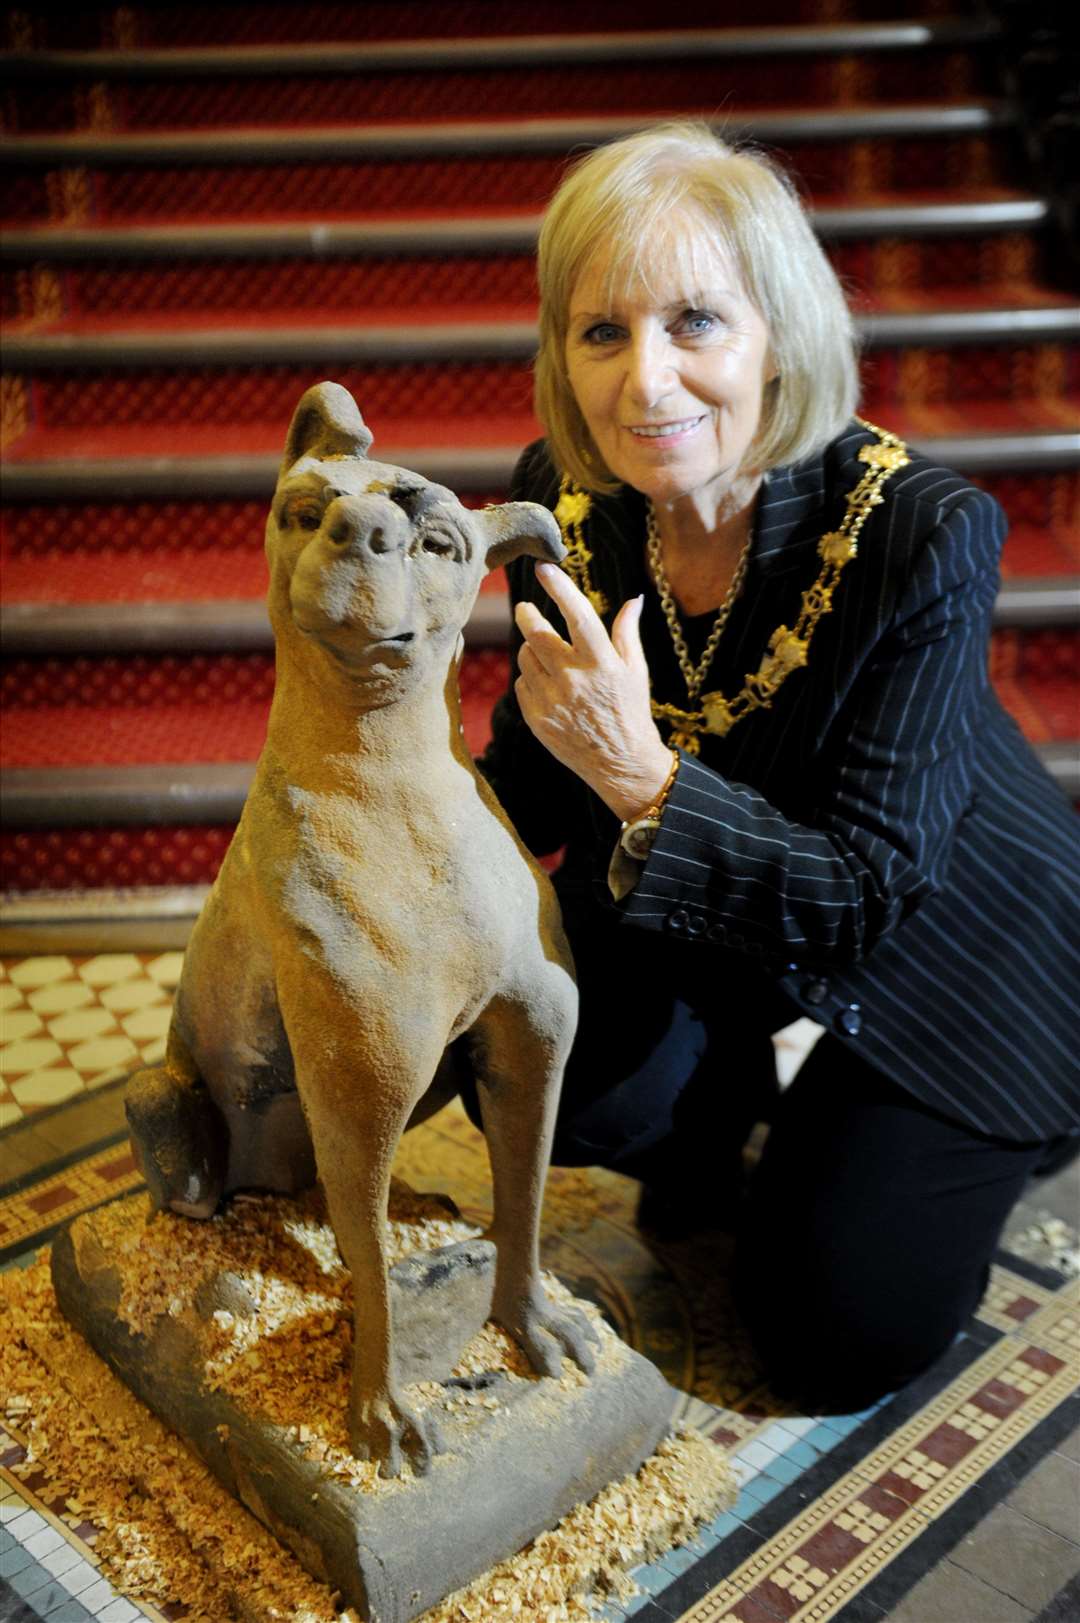 Inverness Provost Helen Carmichael and one of the dog statues.